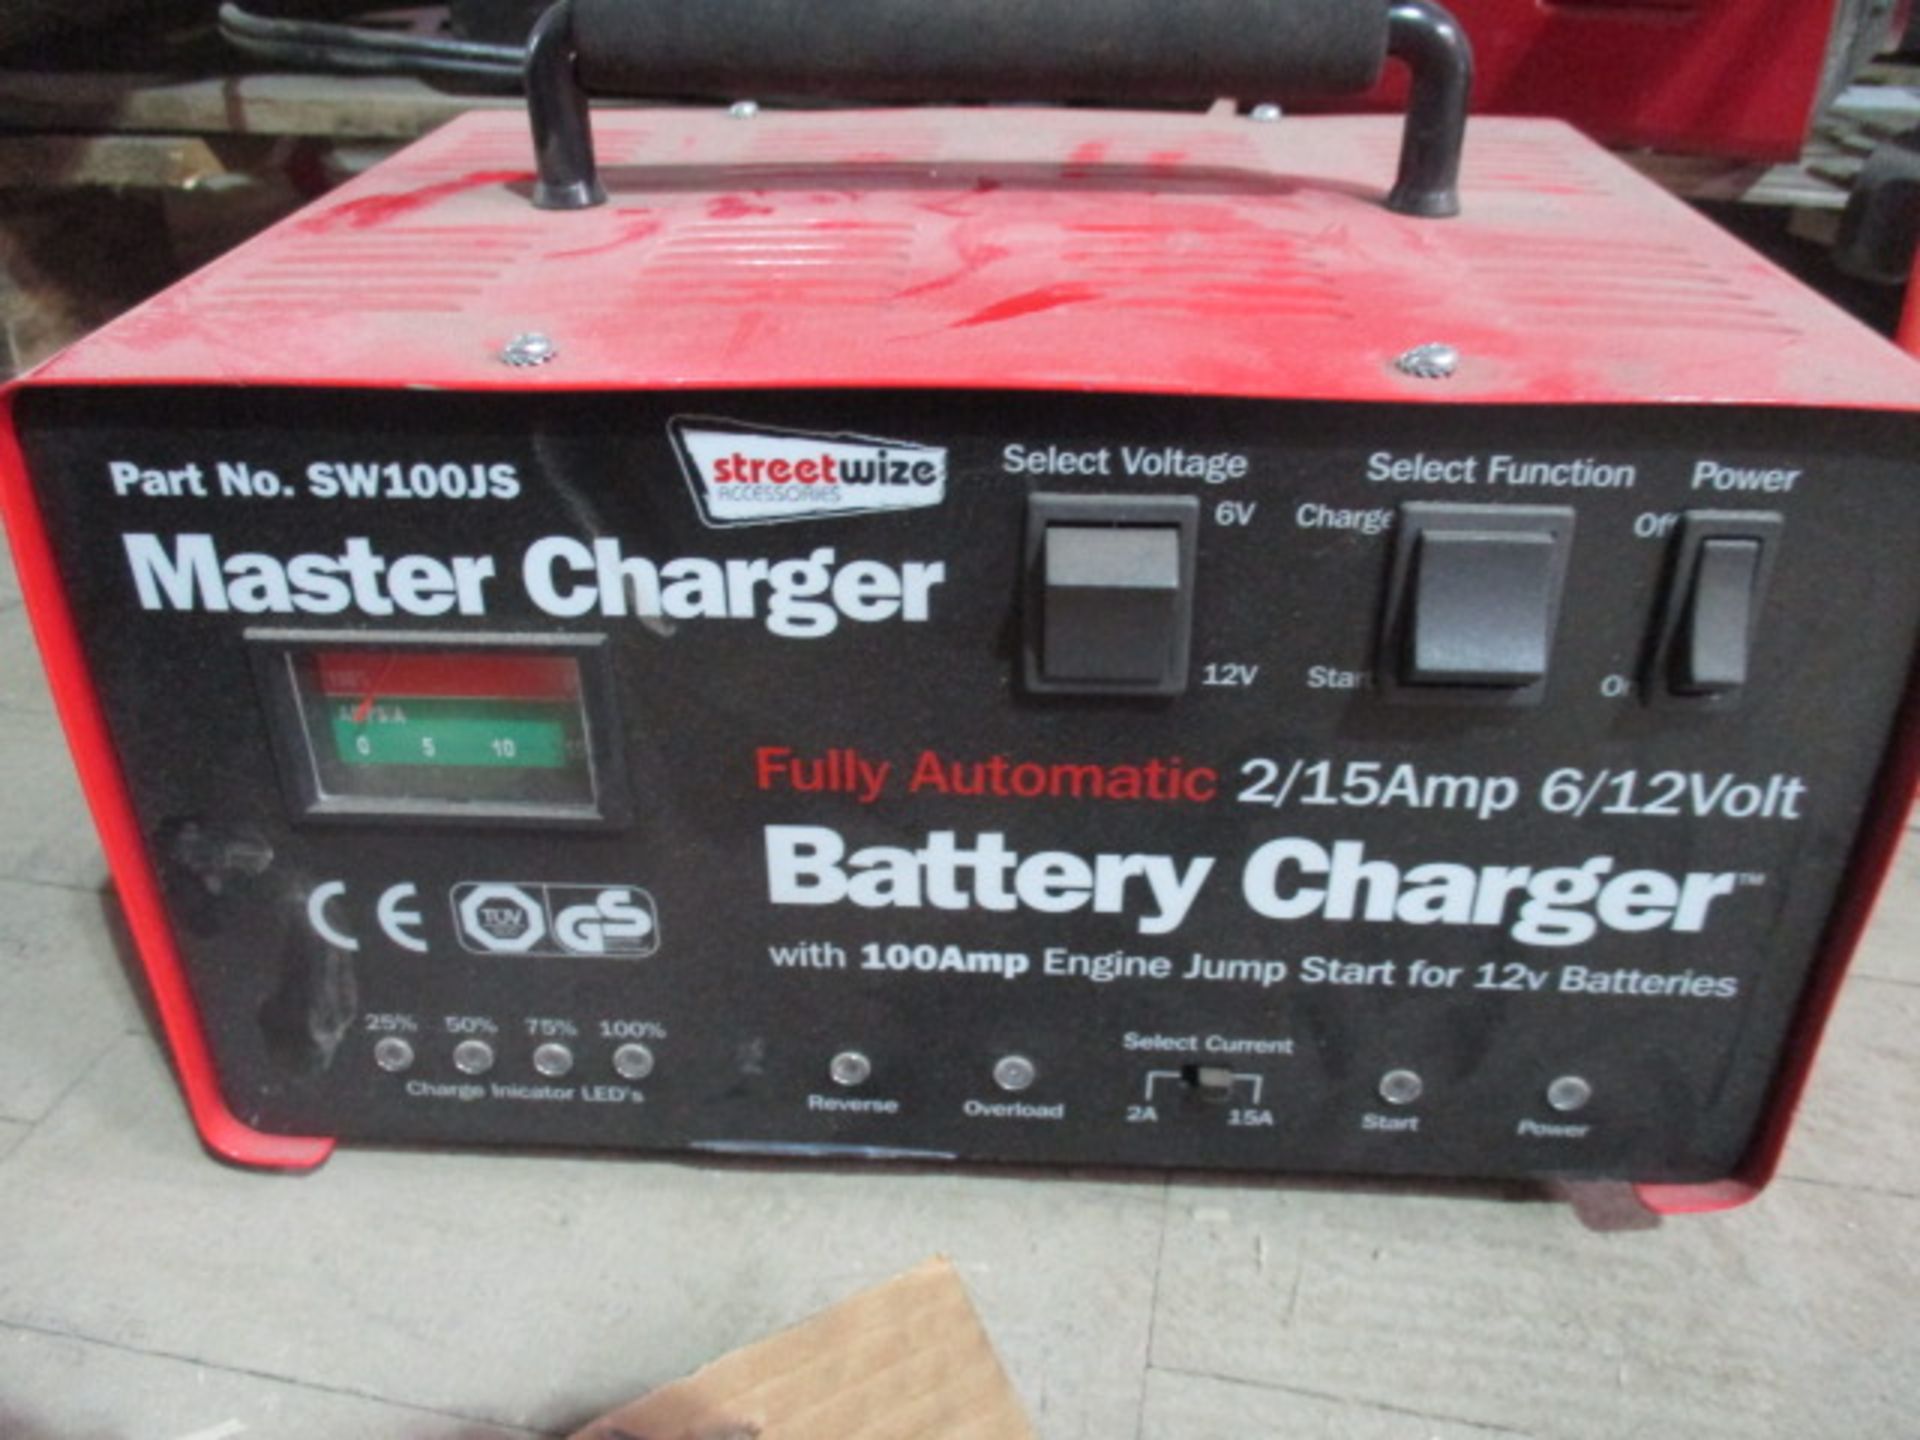 Unused unboxed High Power Streetwize Battery charger